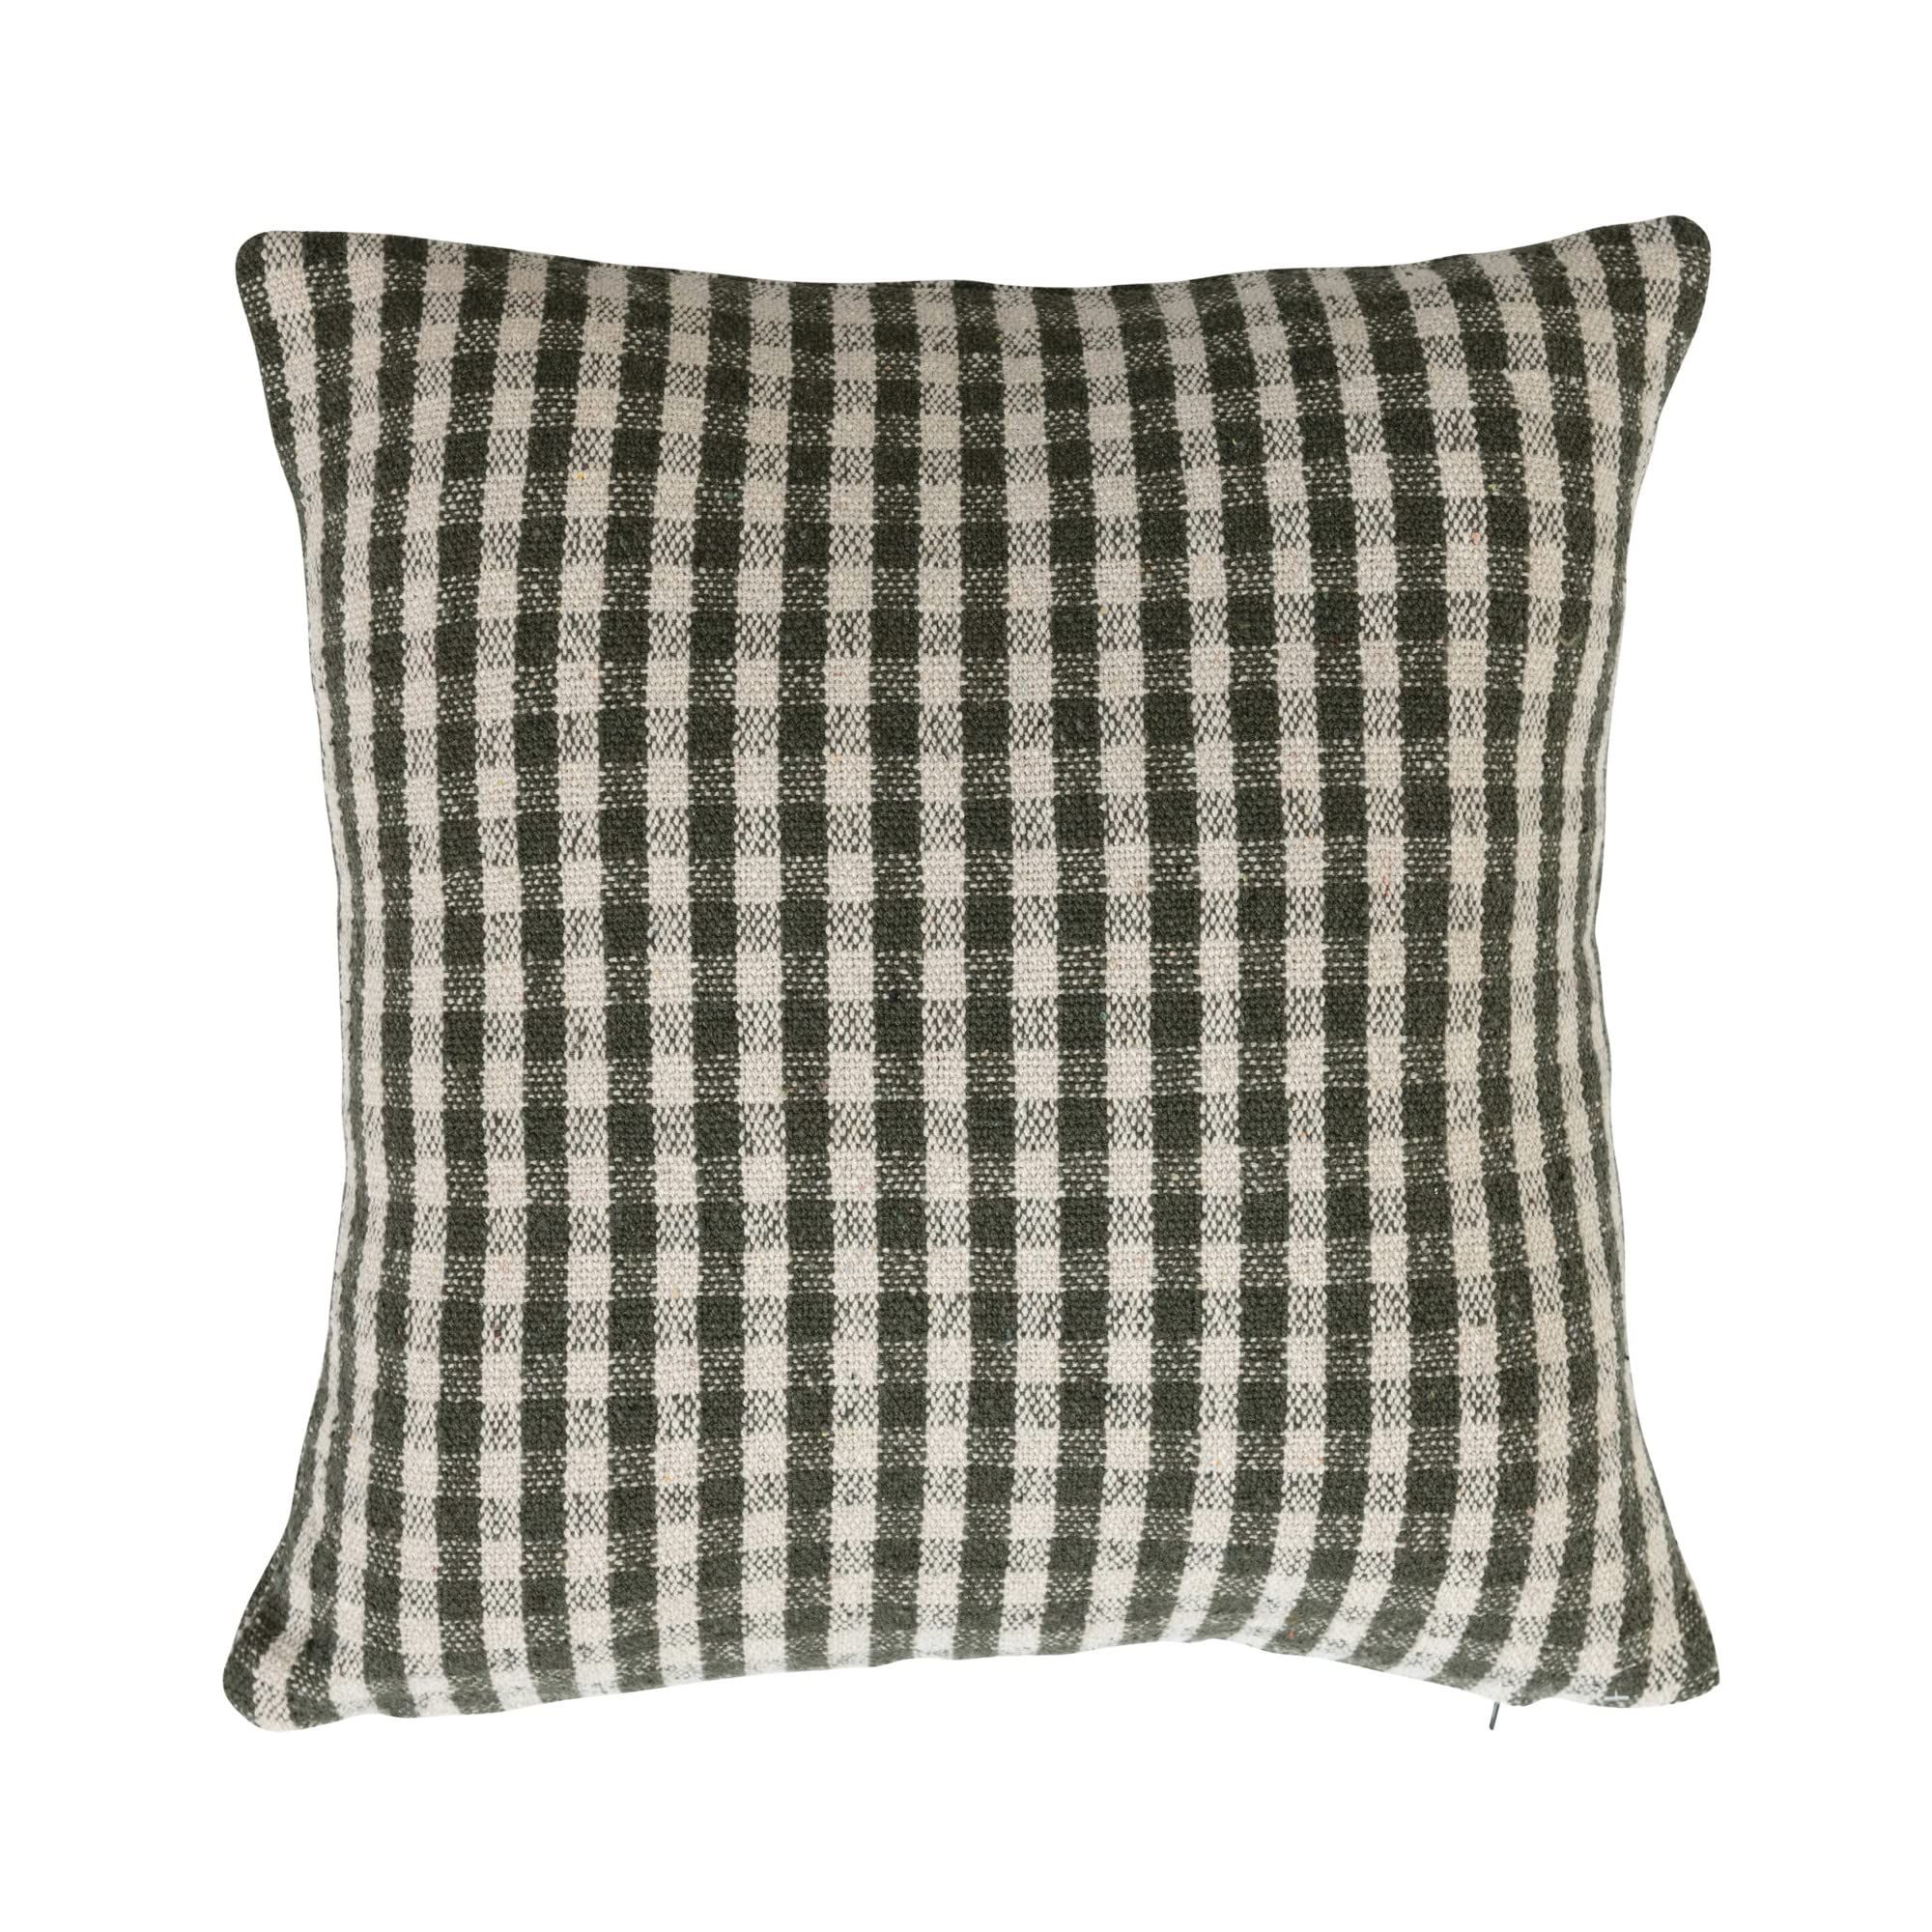 Creative Co-Op Creative Co-Op Woven Recycled Cotton Blend Pillow Gingham, Green and White | Amazon (US)